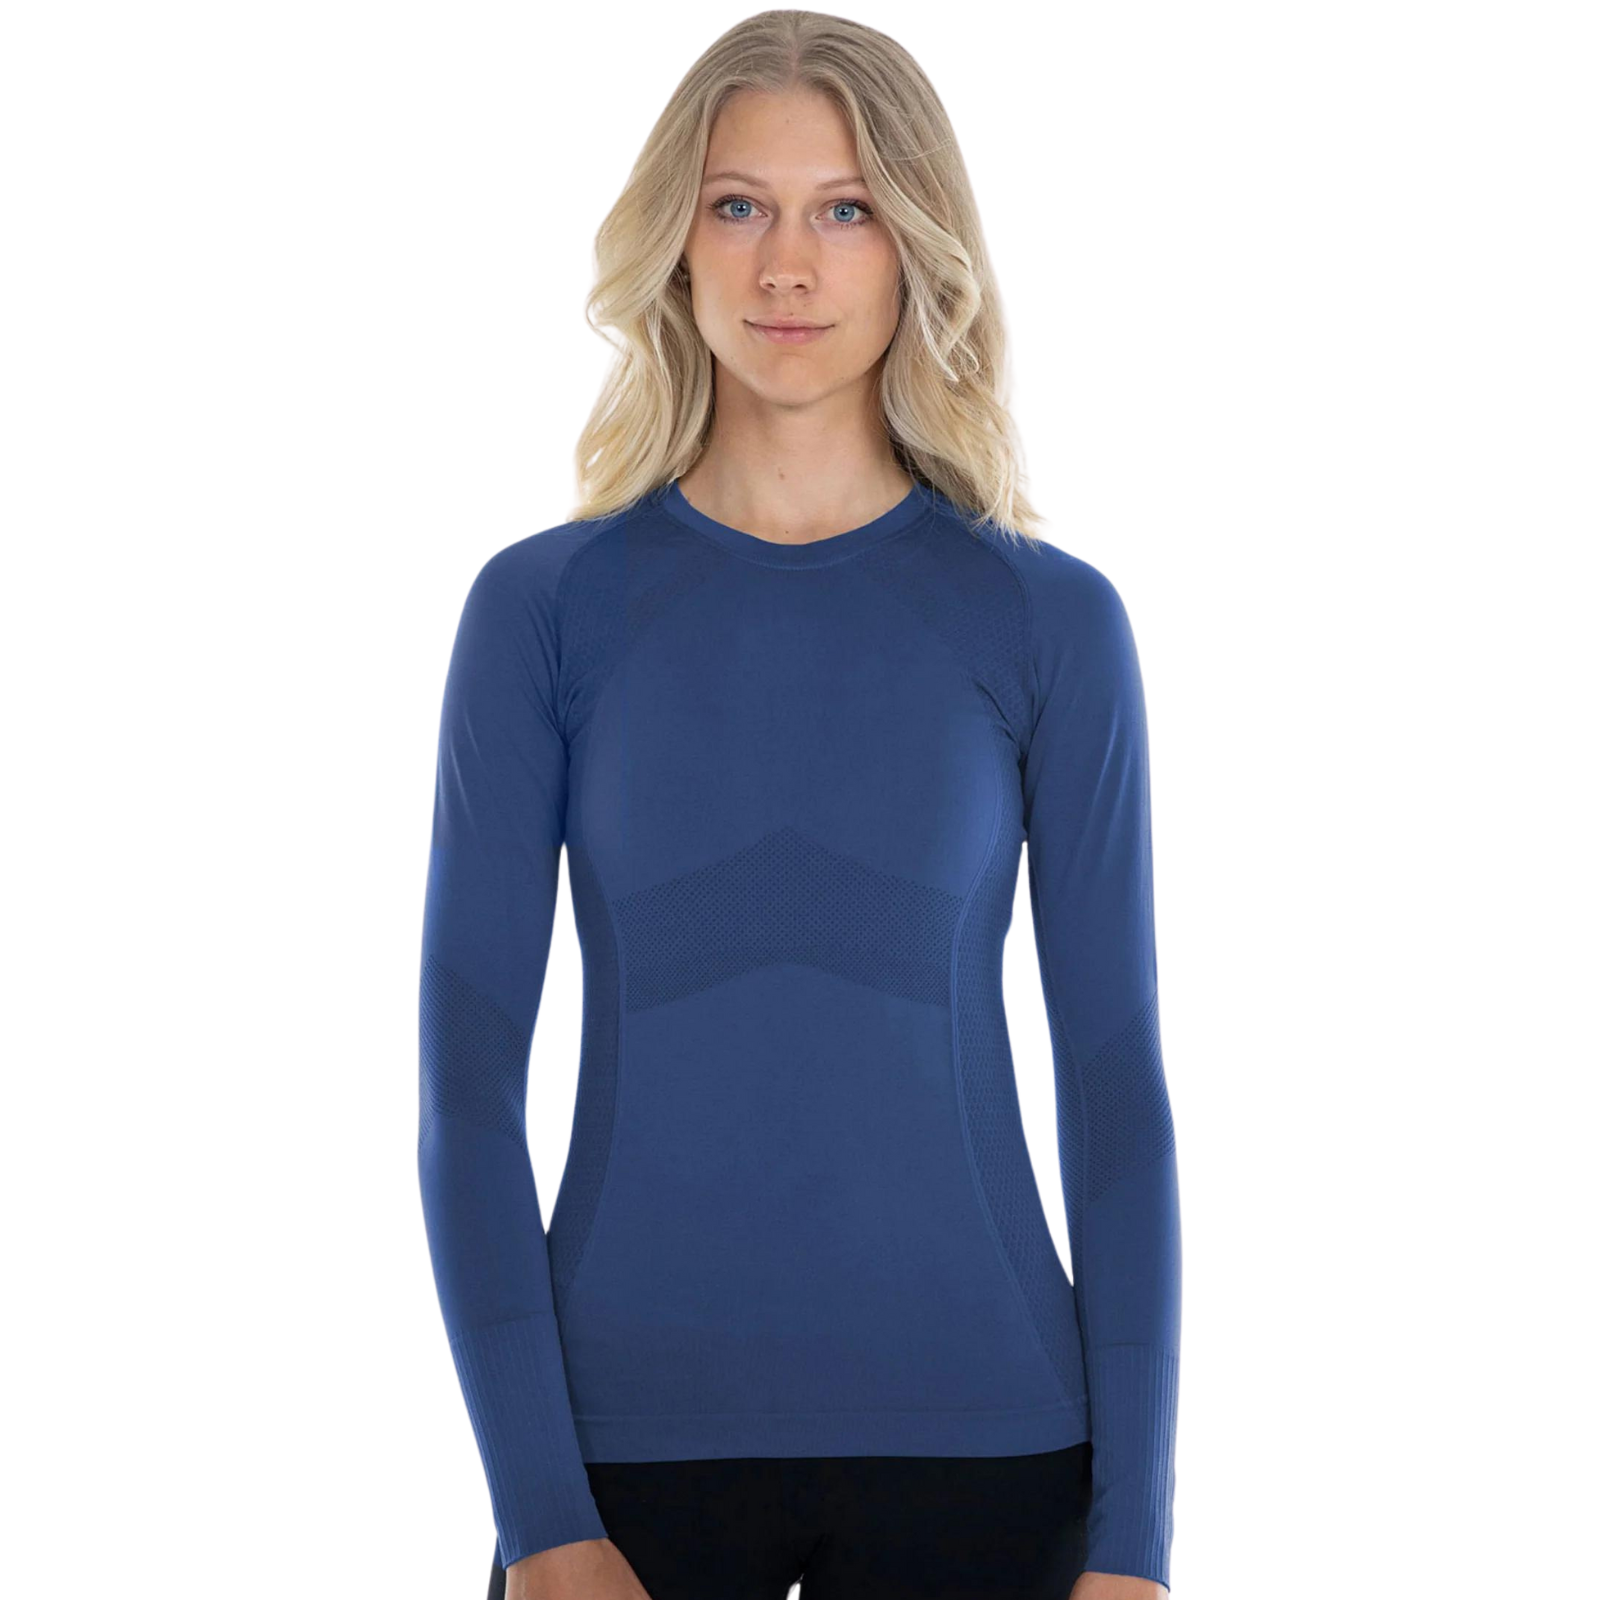 Anique Long Sleeve Crew Shirt in Blueberry - Women&#39;s Small (4-6)